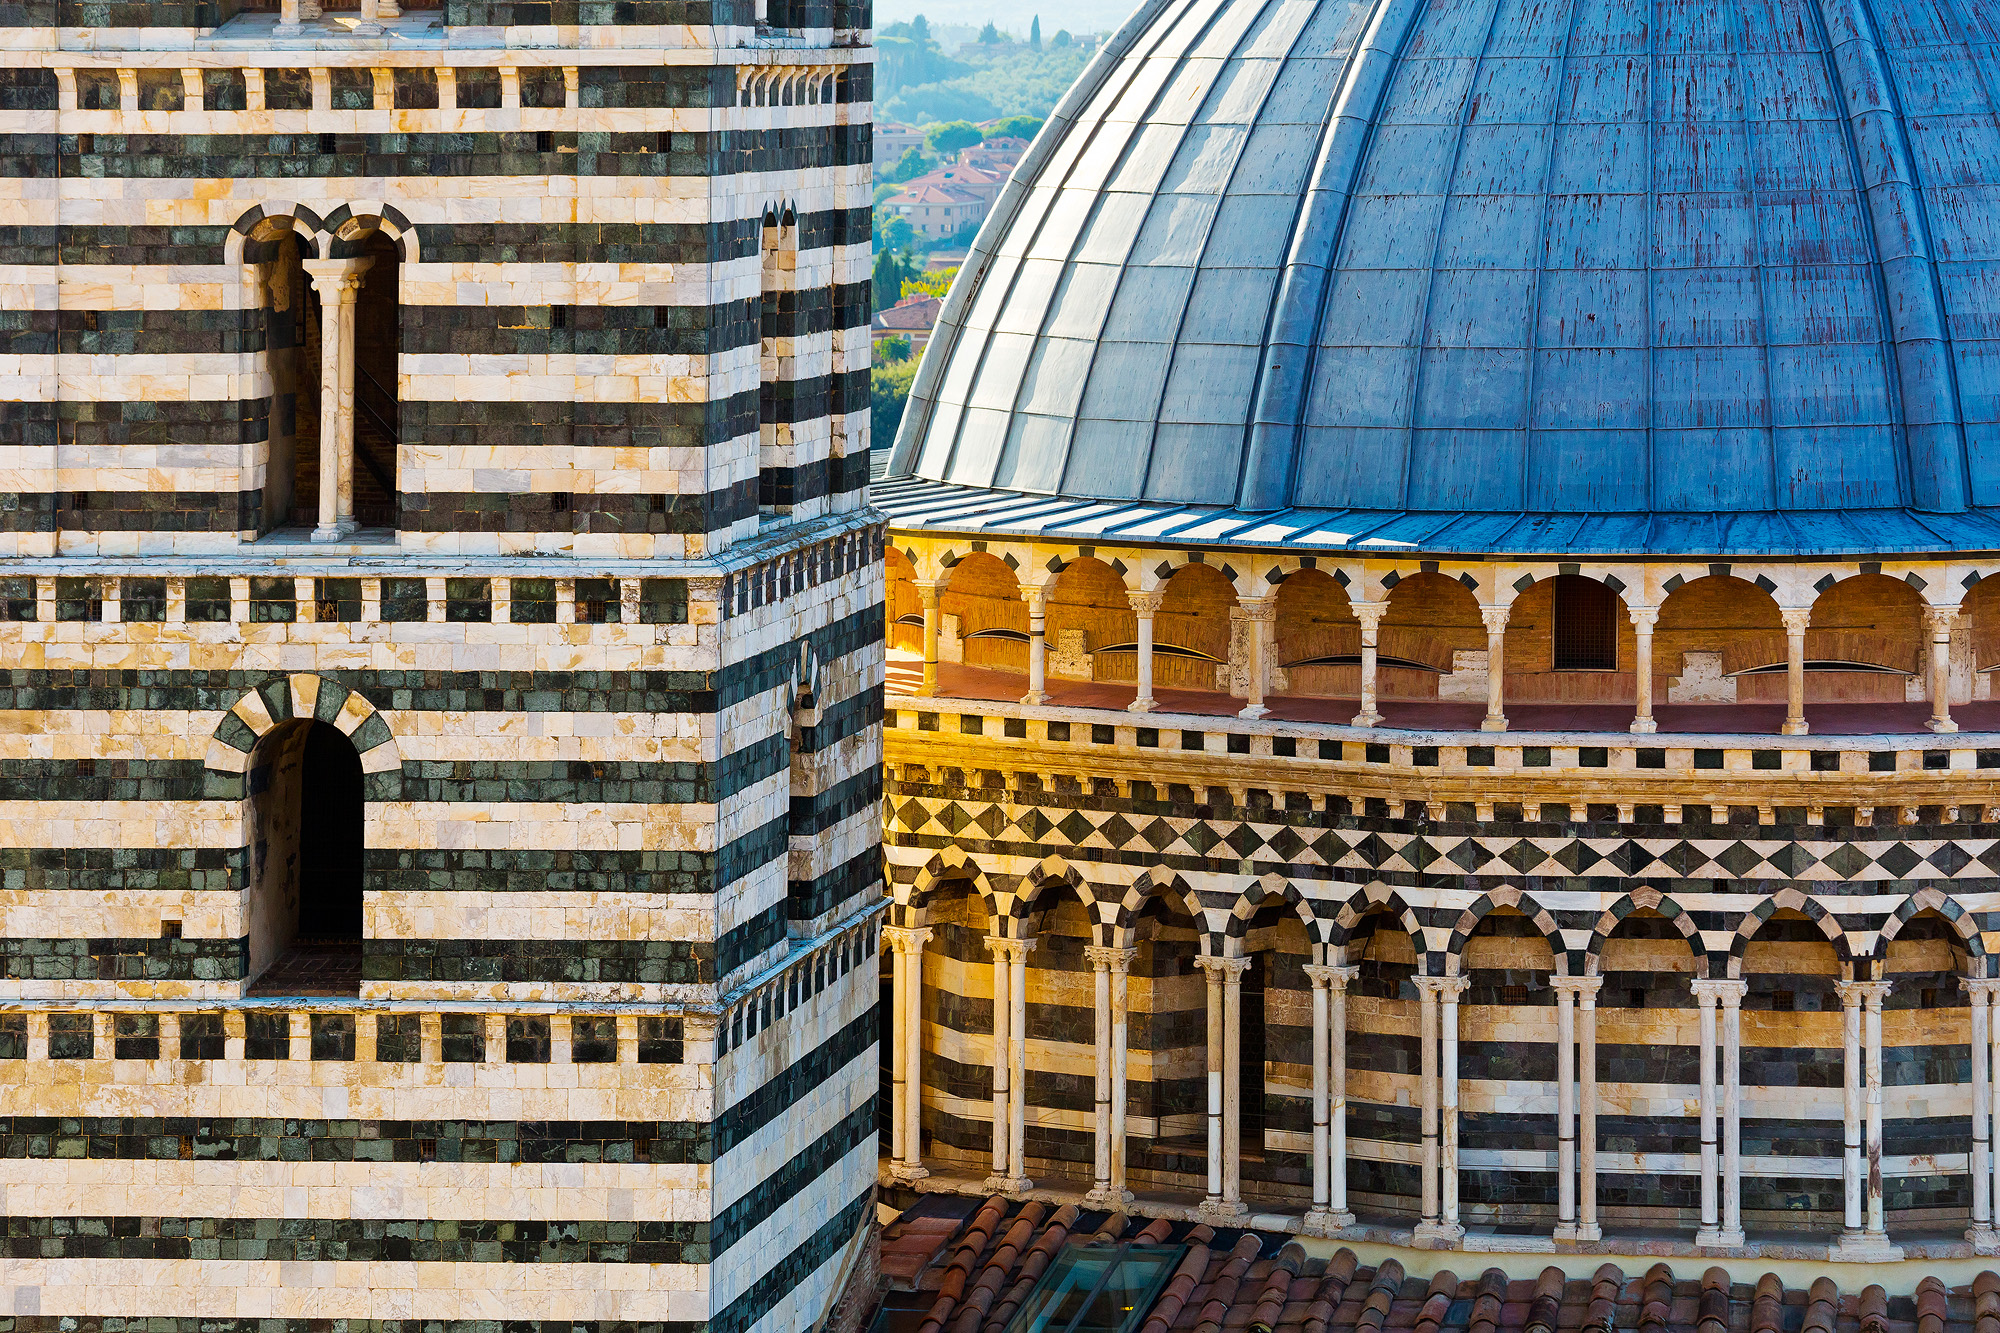 Details of the Siena Cathedral